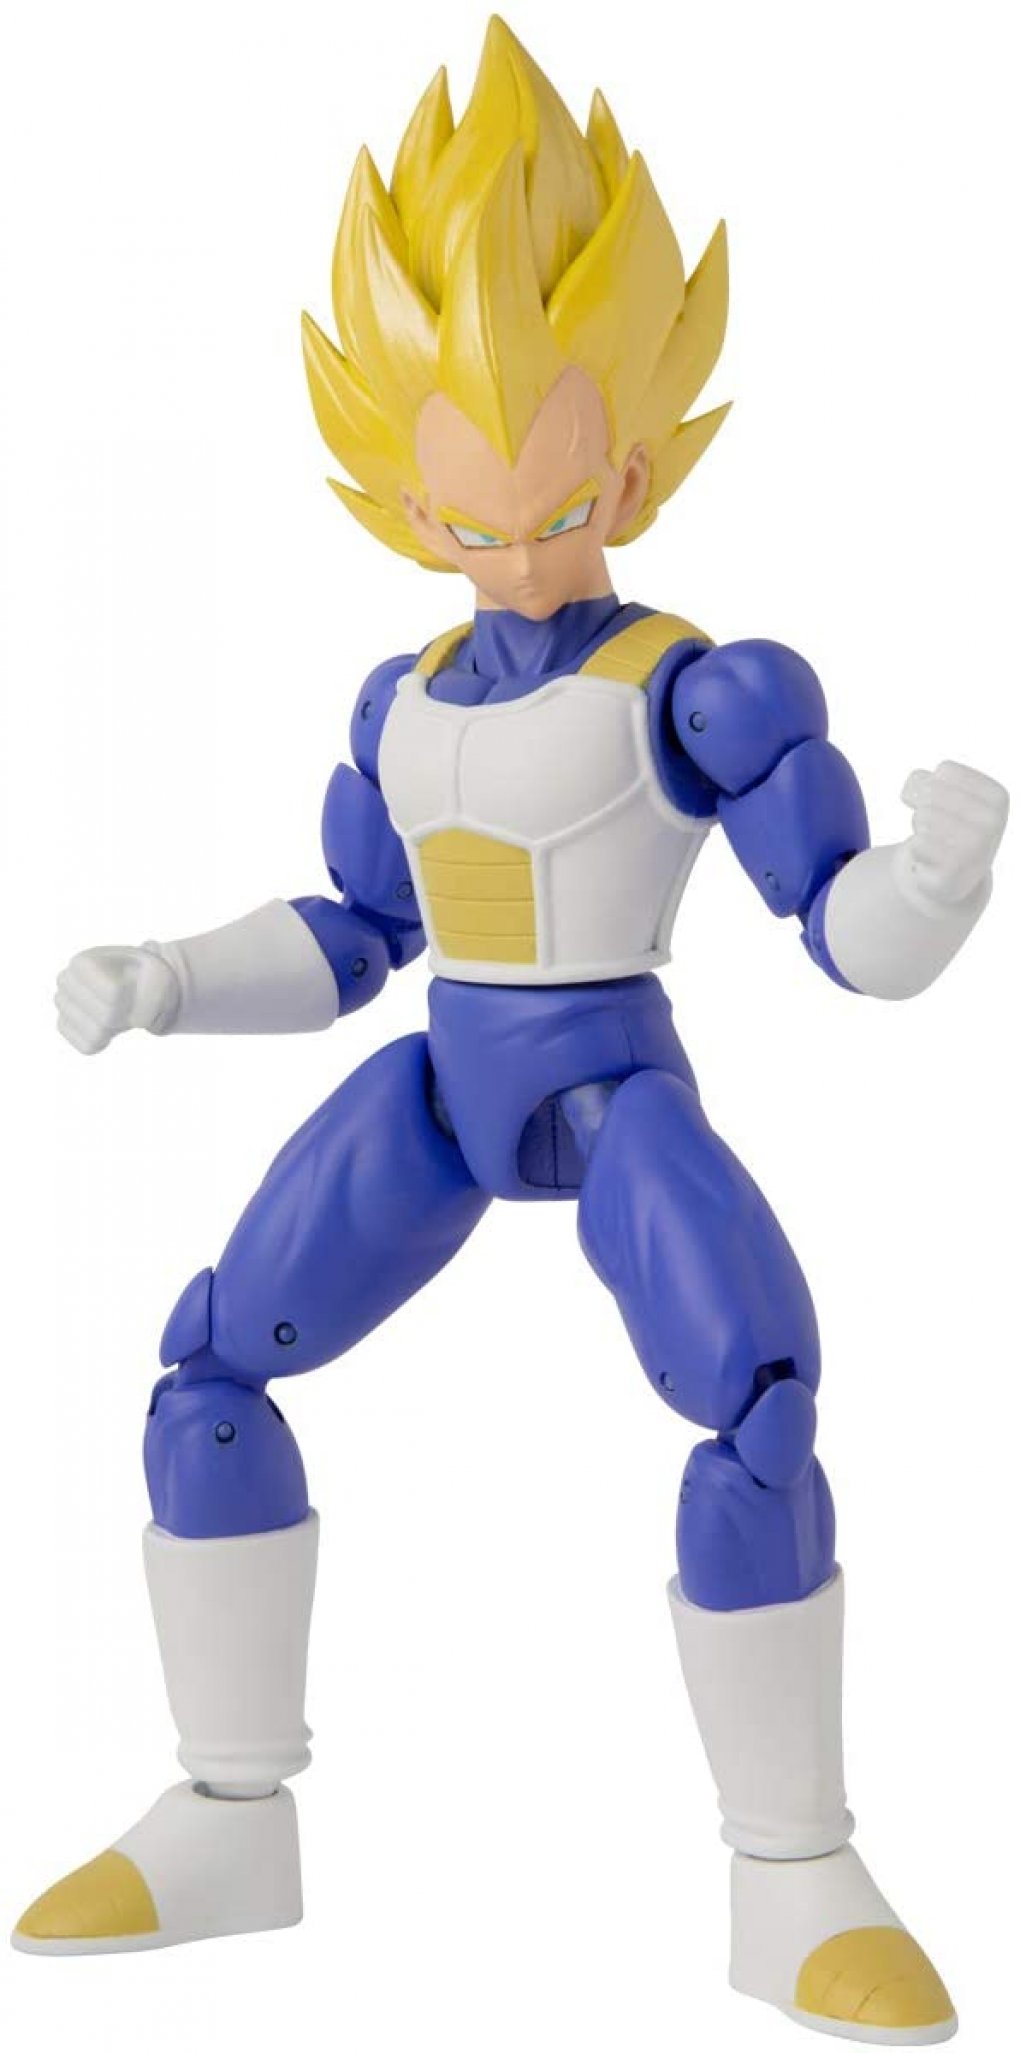 You can get fan-favorite Vegeta from Dragon Ball as a figure during Prime Day 2022 on Amazon at a special price.